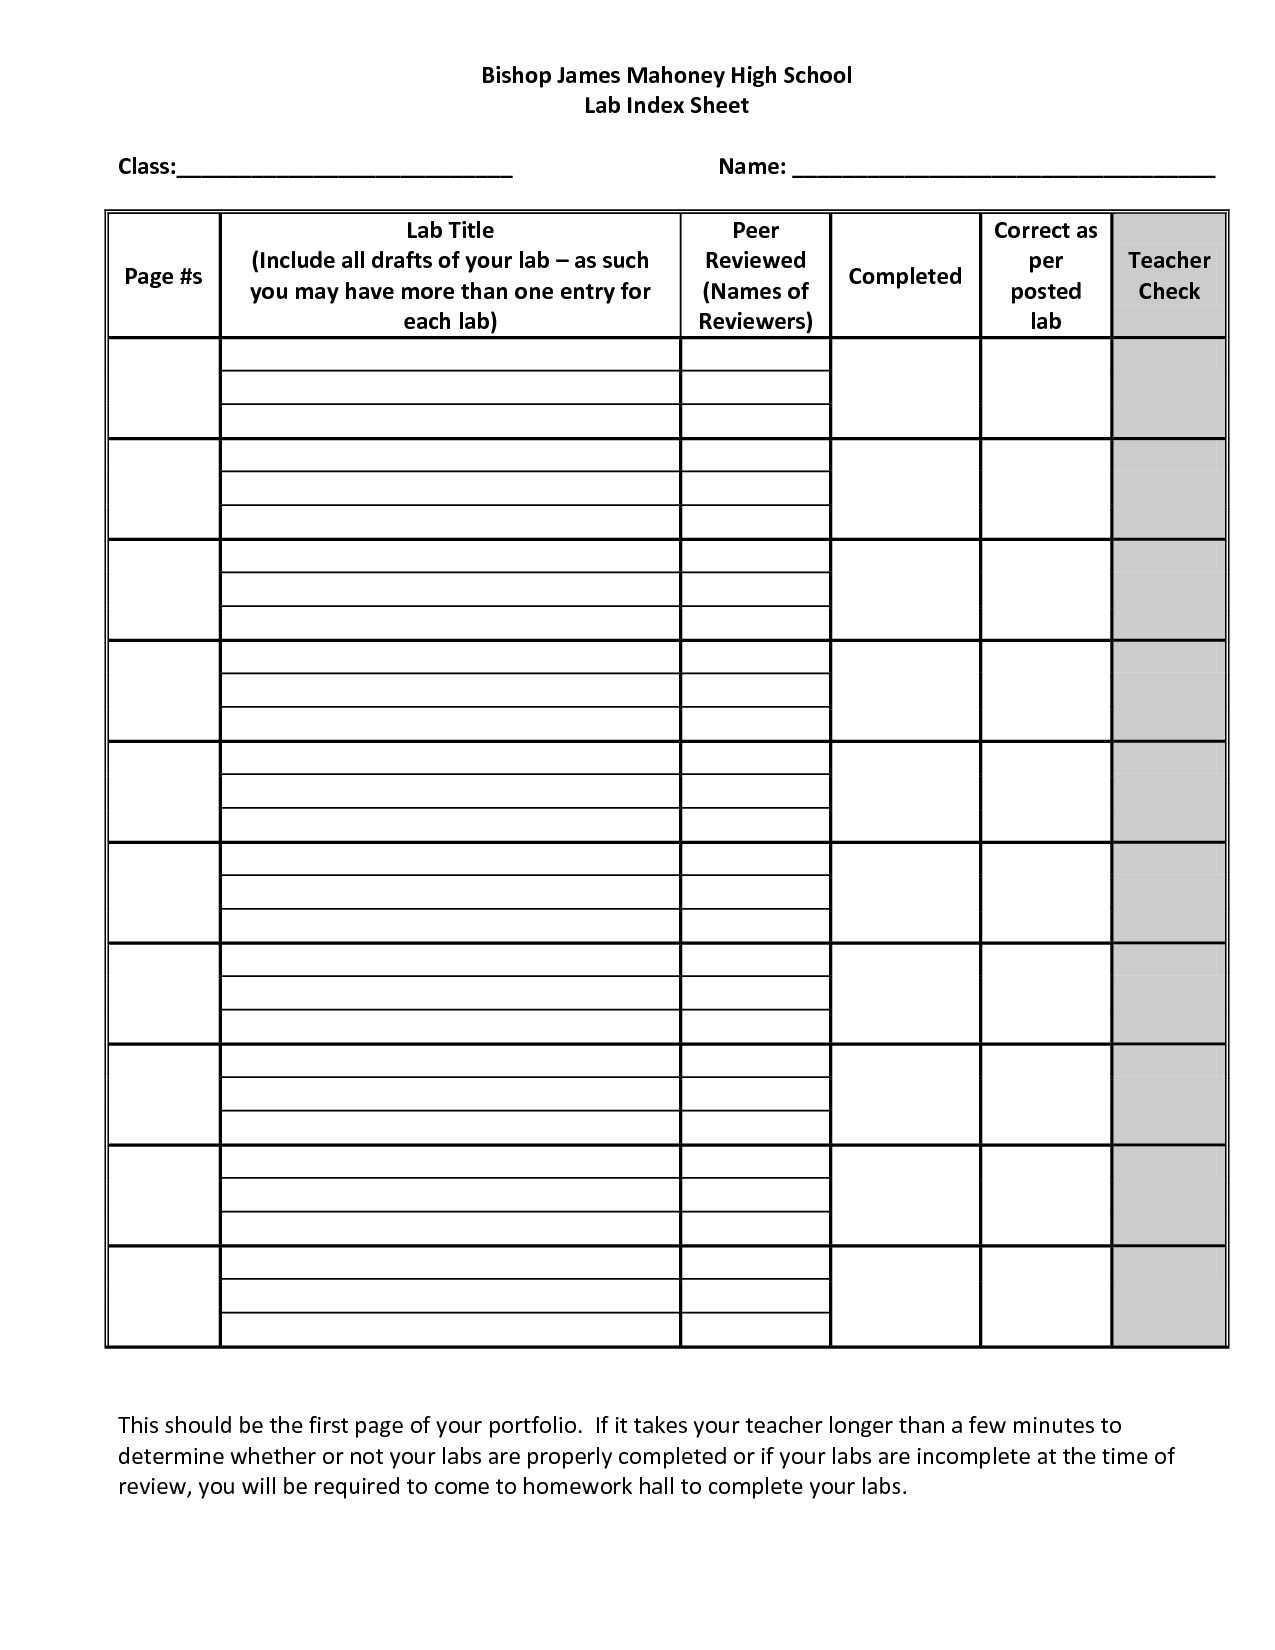 5 Best Images of Homework Assignment Sheets Free Printable Printable